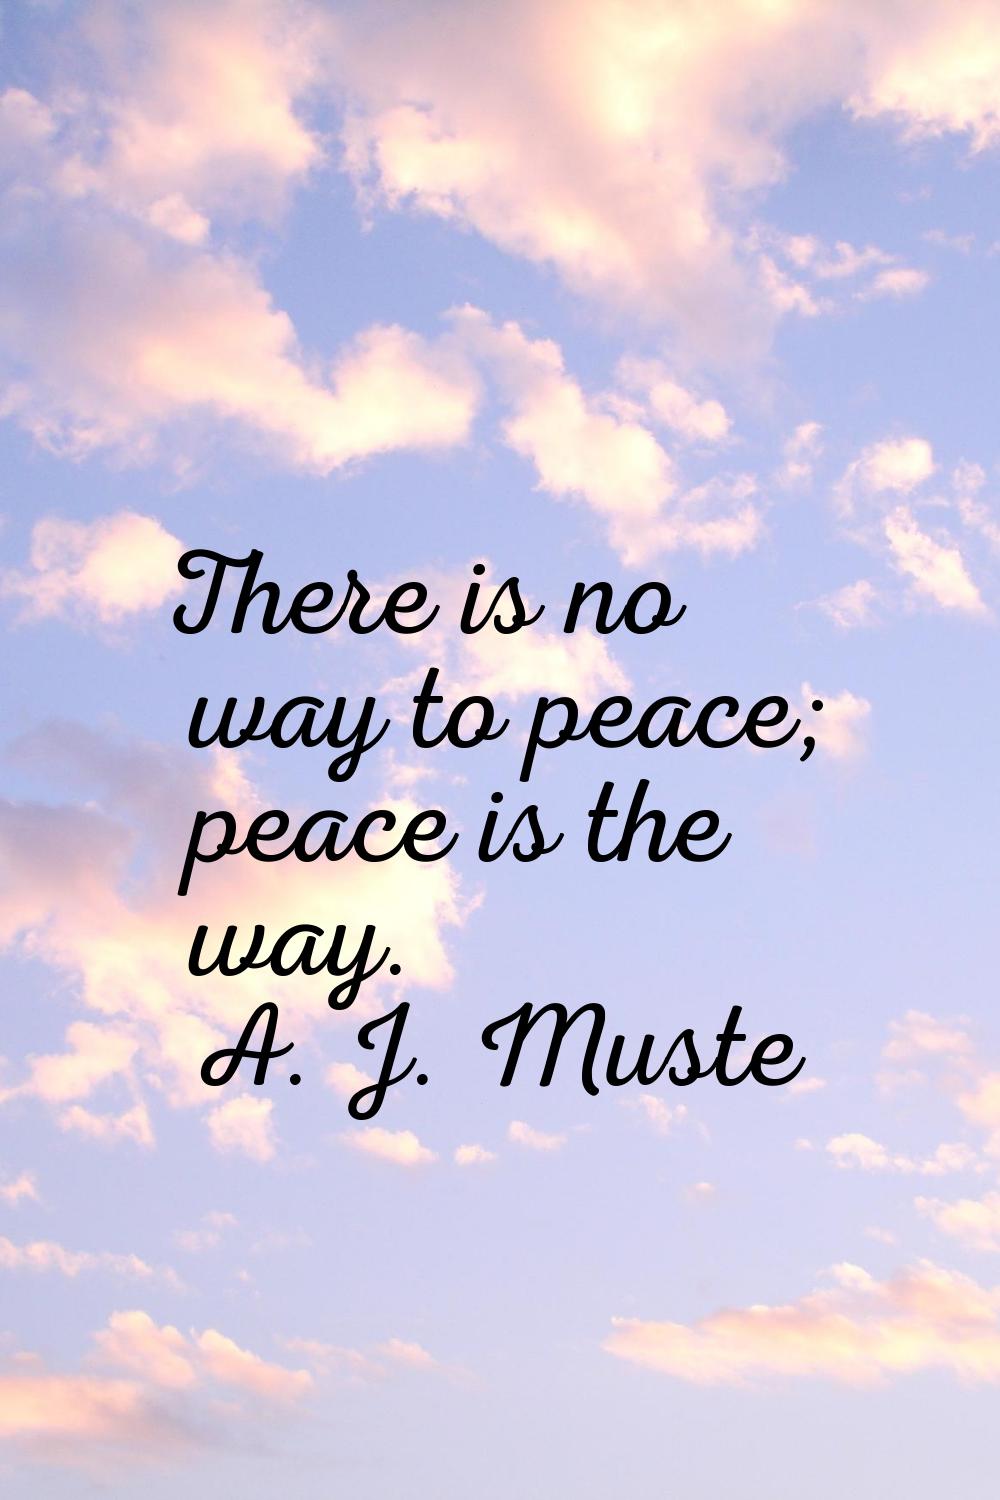 There is no way to peace; peace is the way.